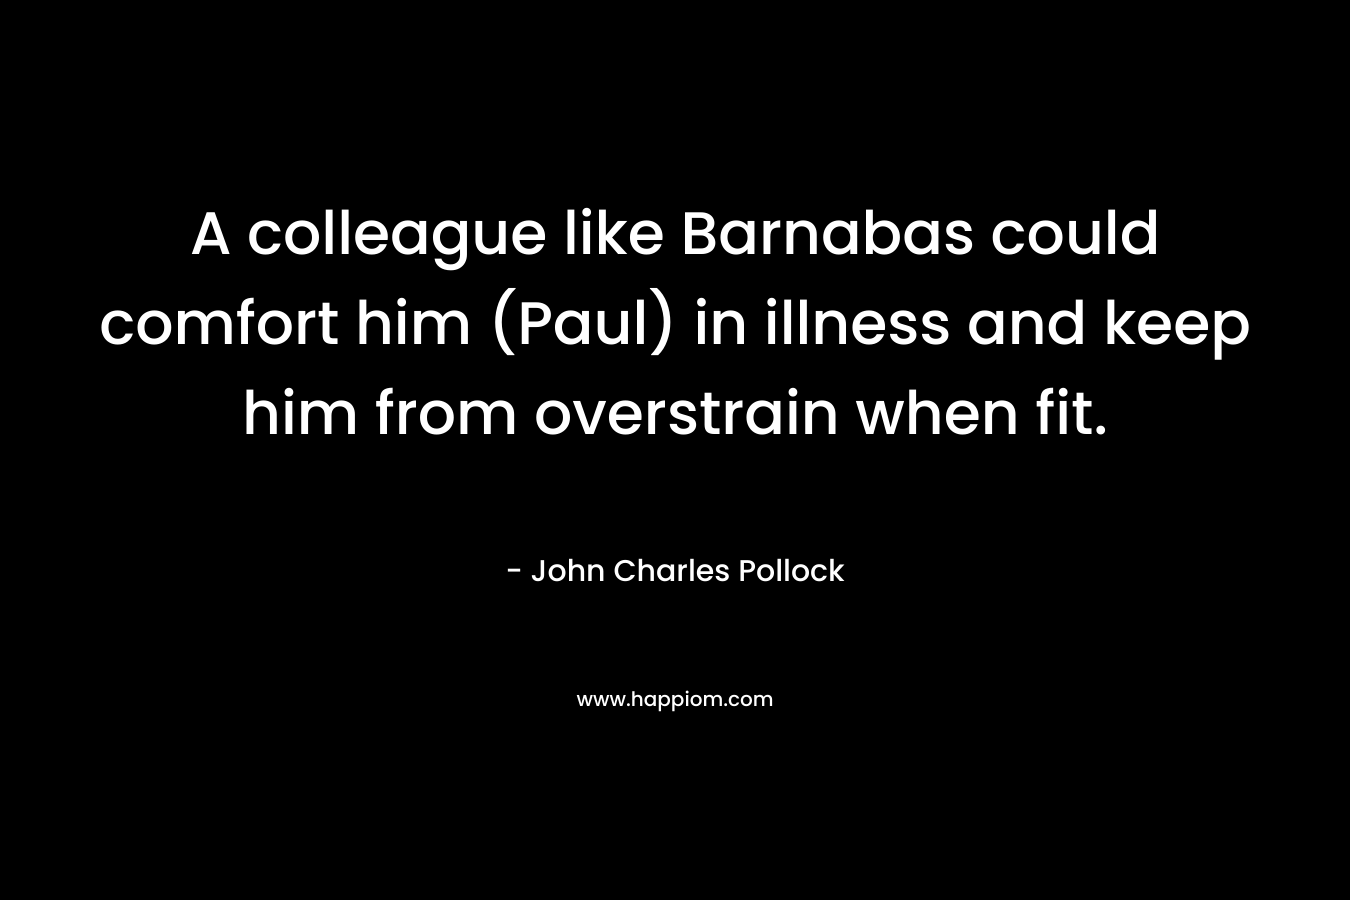 A colleague like Barnabas could comfort him (Paul) in illness and keep him from overstrain when fit. – John Charles Pollock